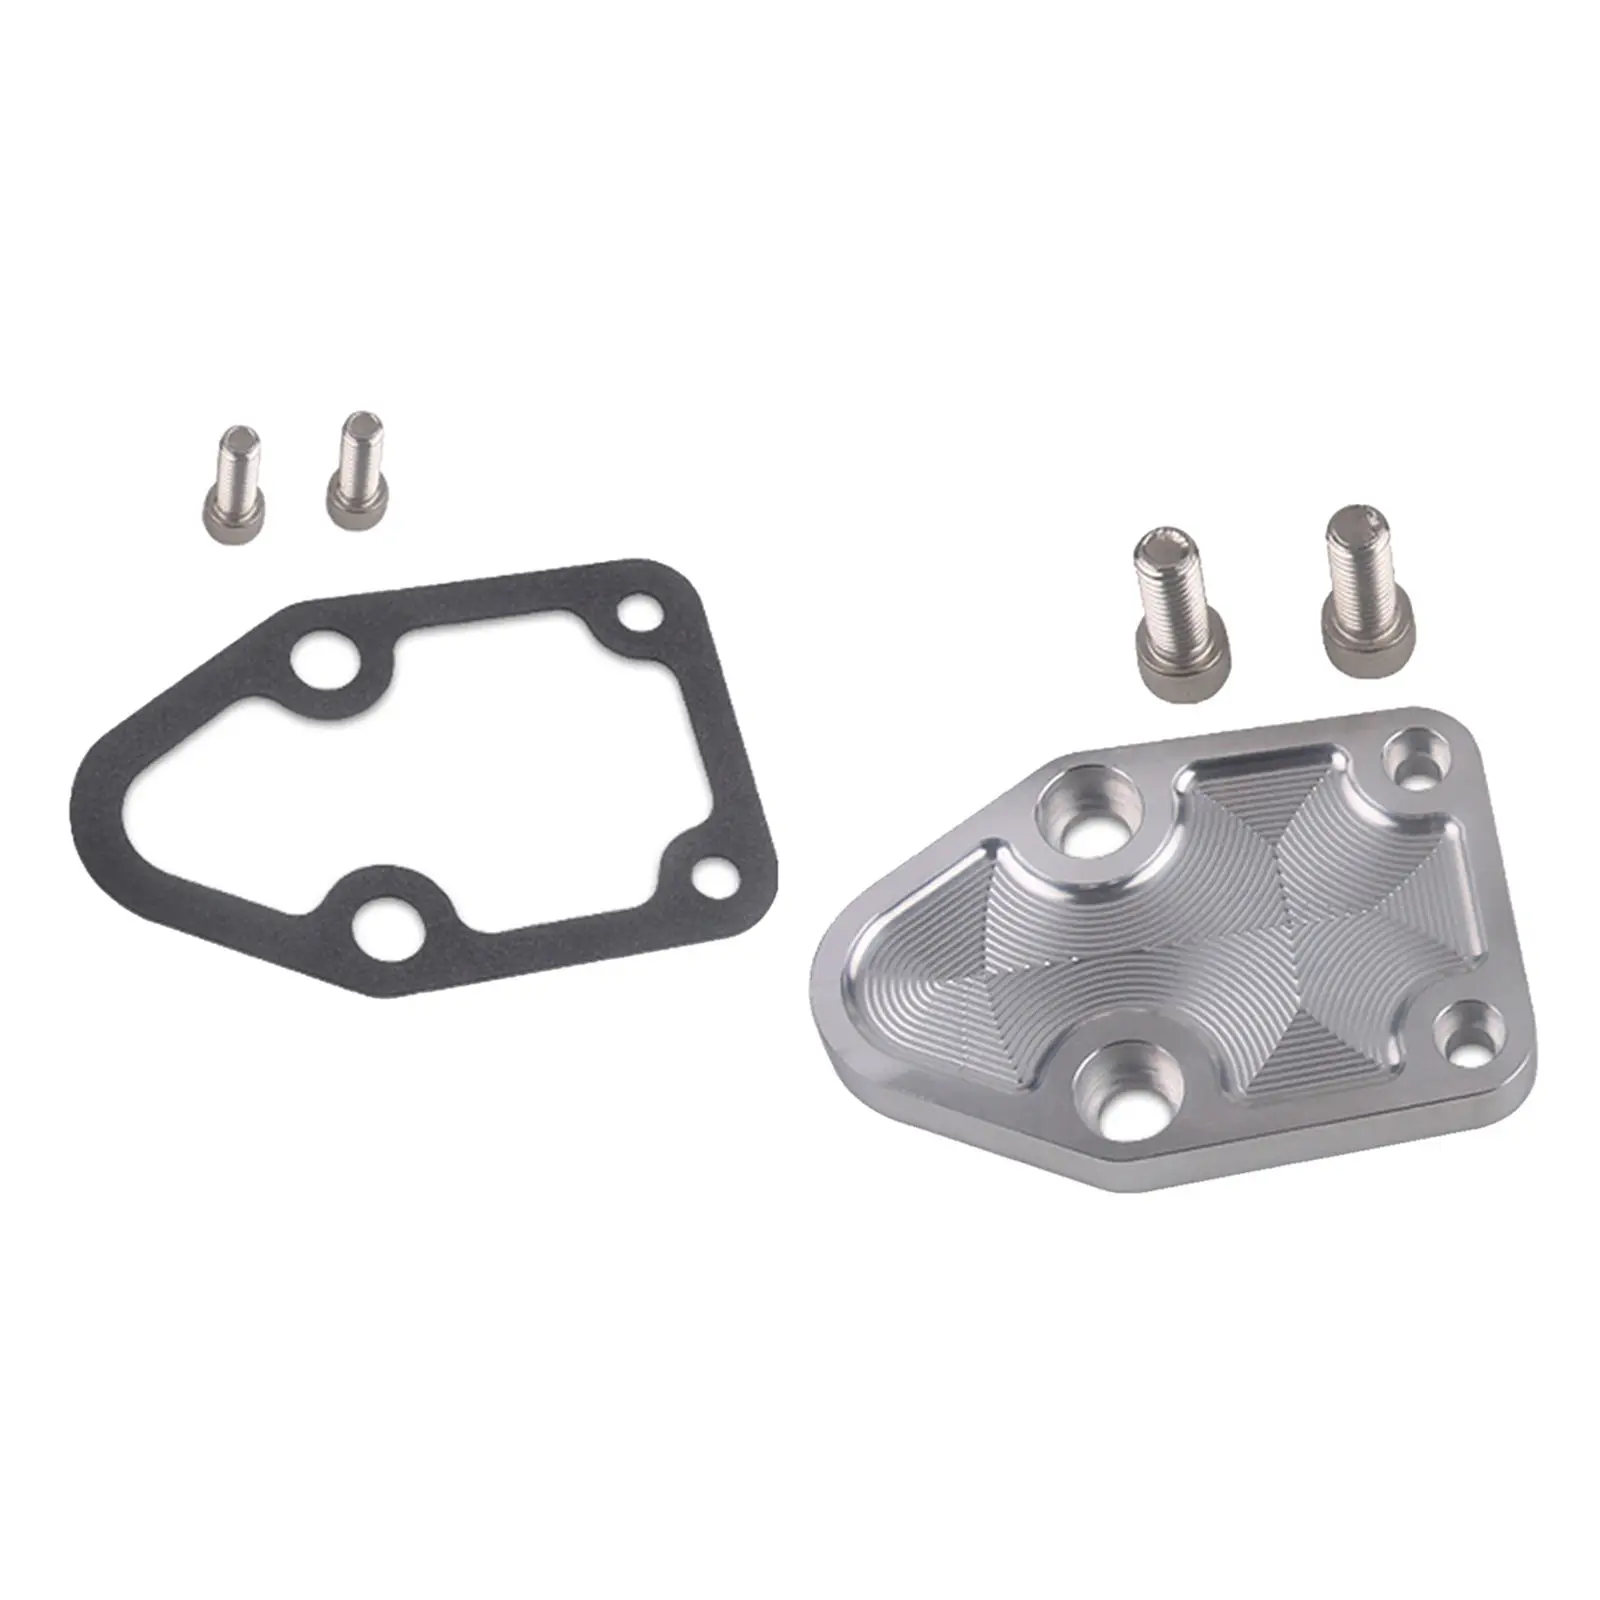 Fuel Pump Plate Kit with Gasket Replace for CHEVY SB 283 327 350 383 400